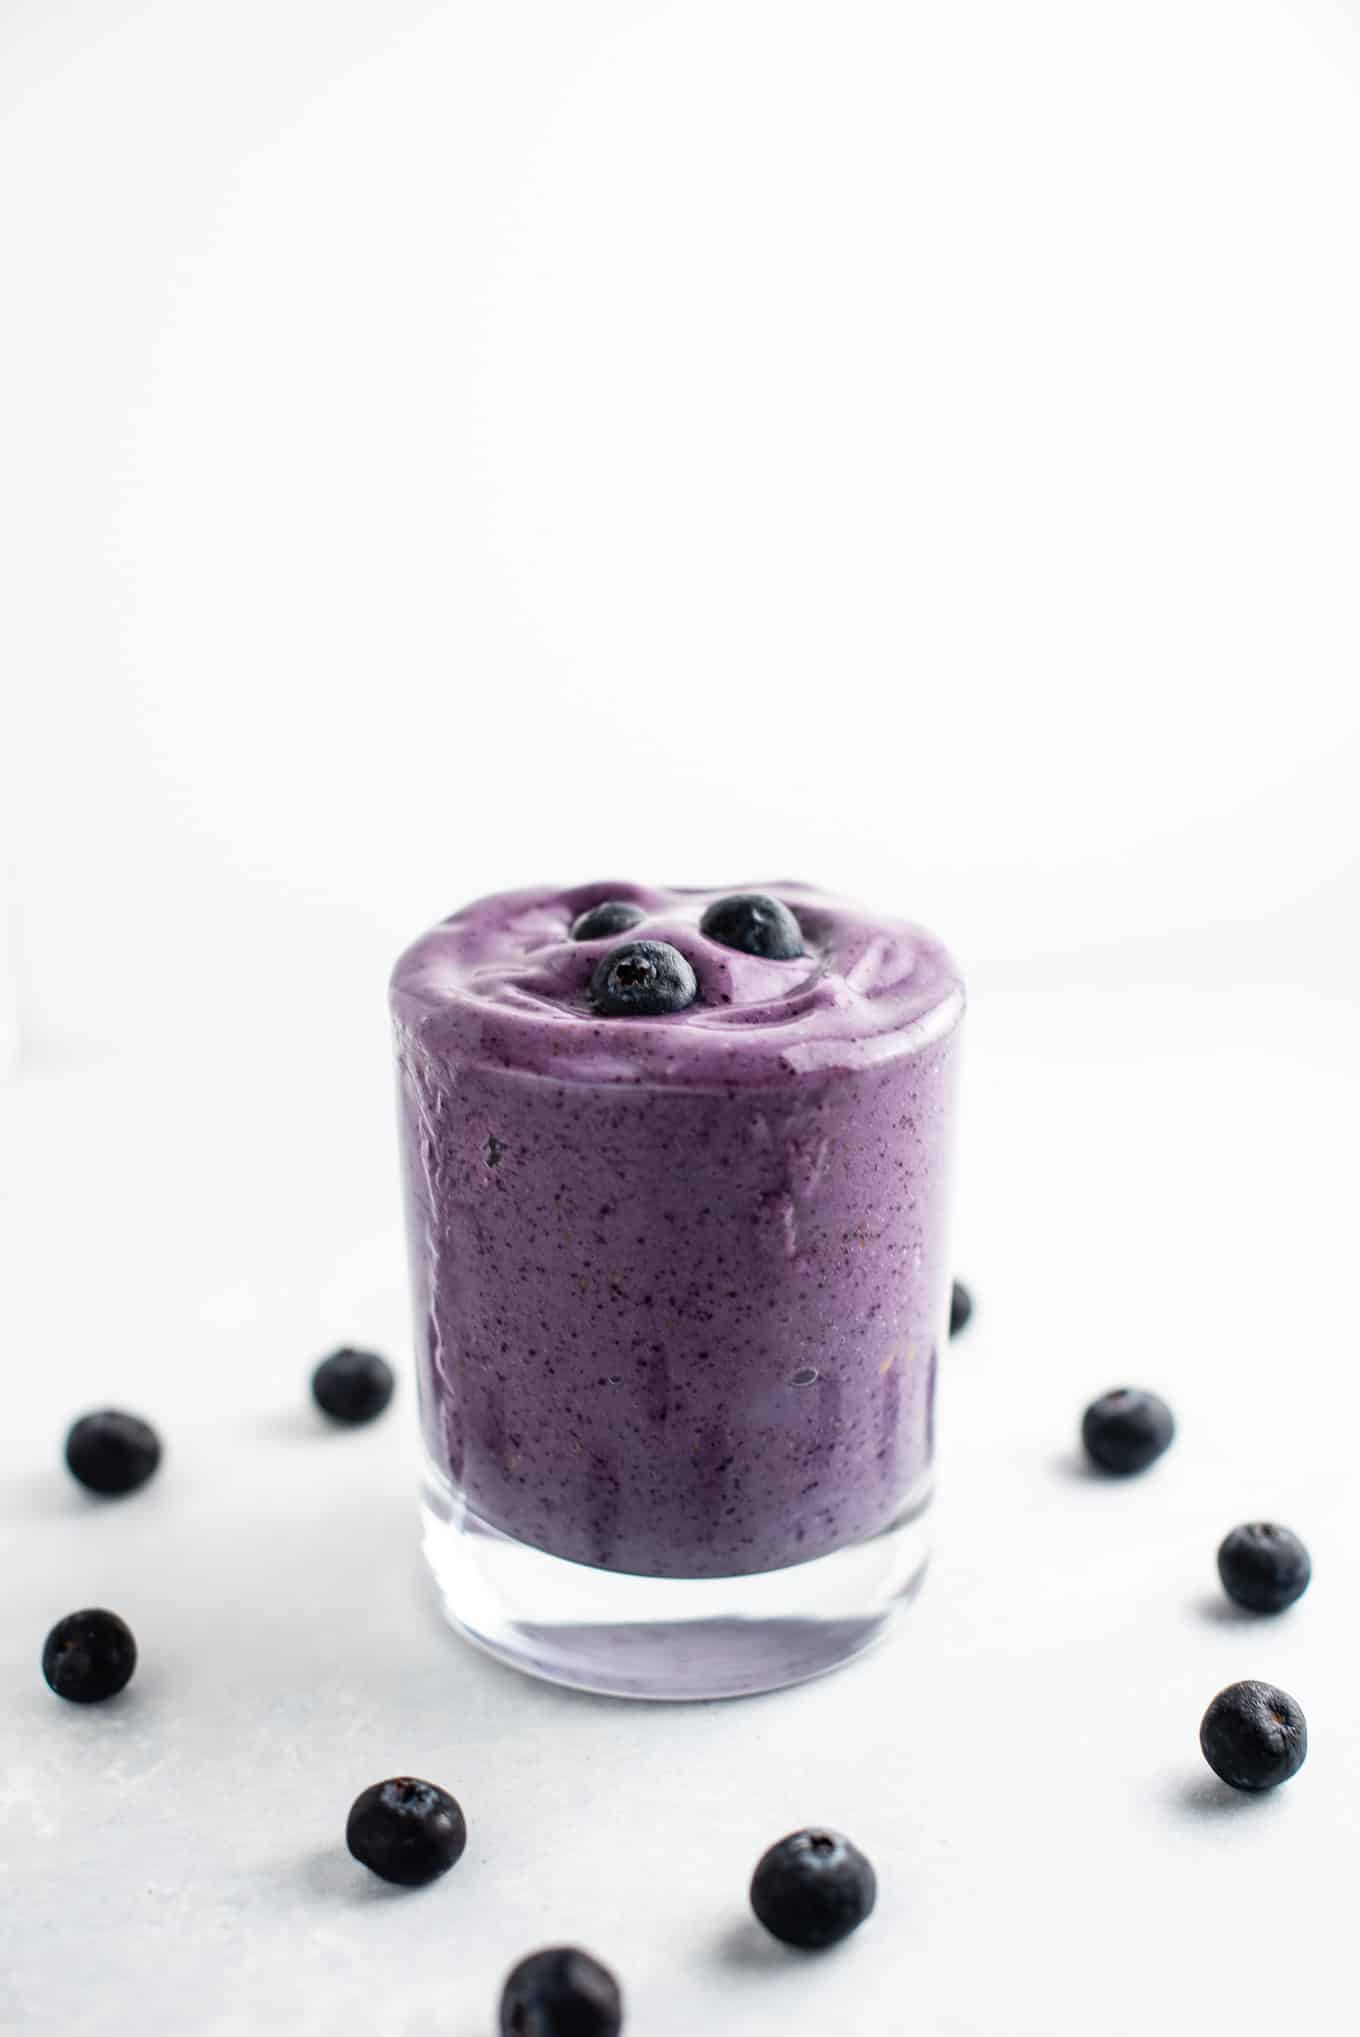 blueberry and banana smoothie in a glass